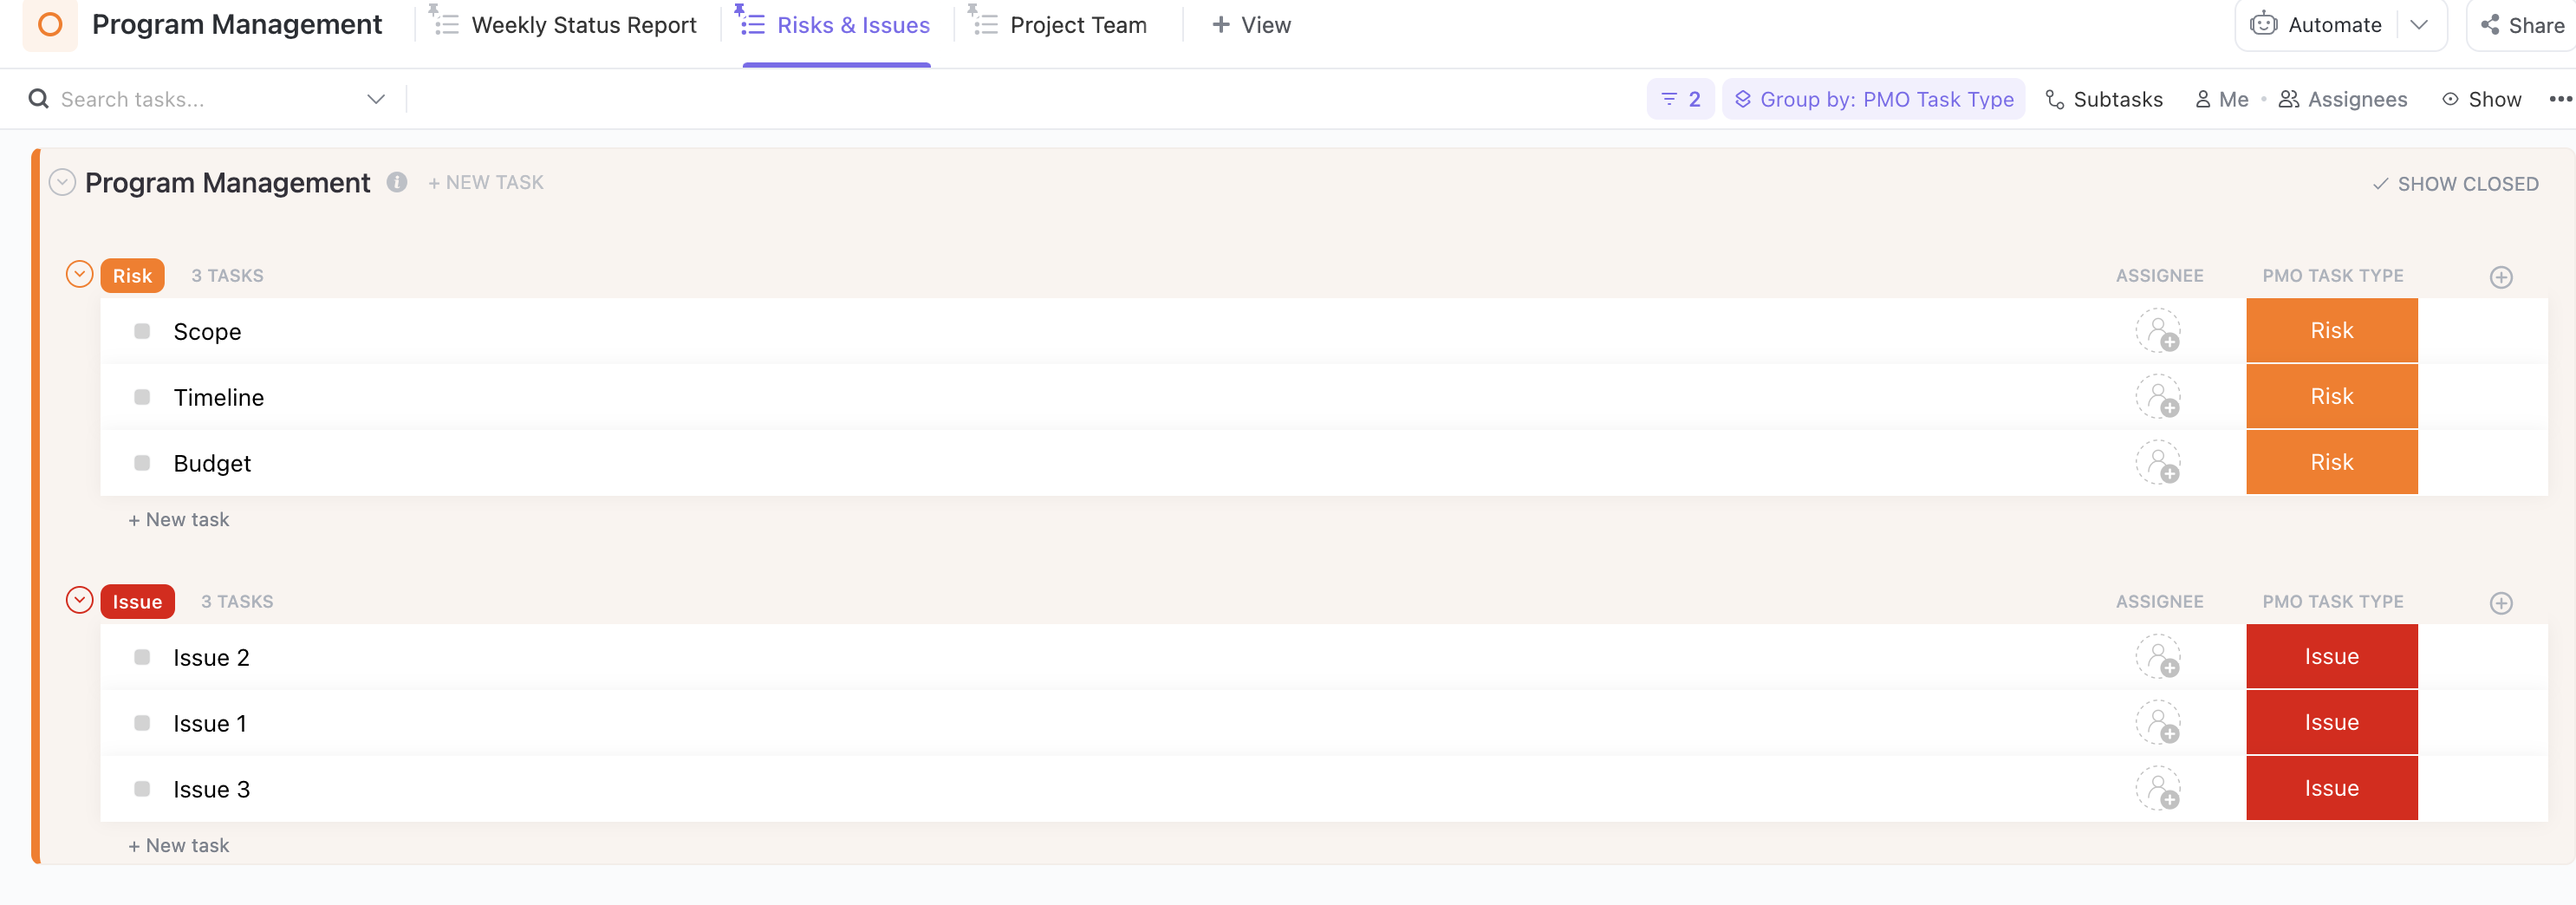 Screenshot of someone using a List view to keep track of project risks and issues.